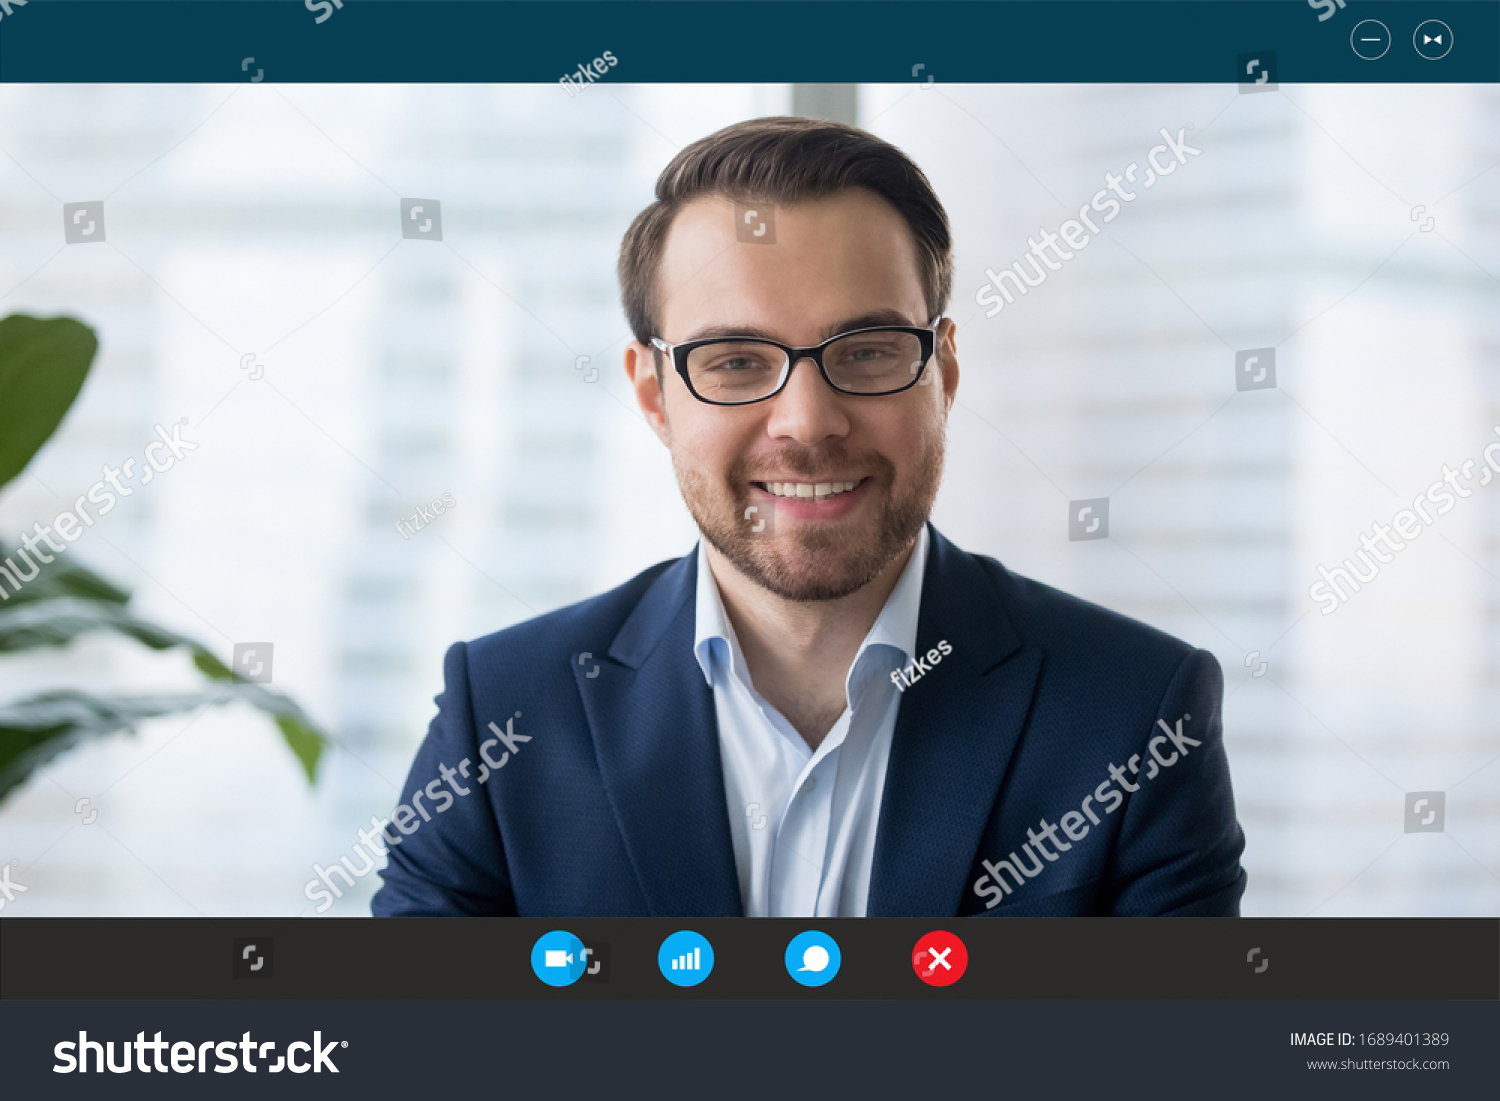 Headshot portrait screen view of confident businessman talk on Webcam conference with business client, smiling male employee speak on video call, communicate online using wireless Internet connection #1689401389